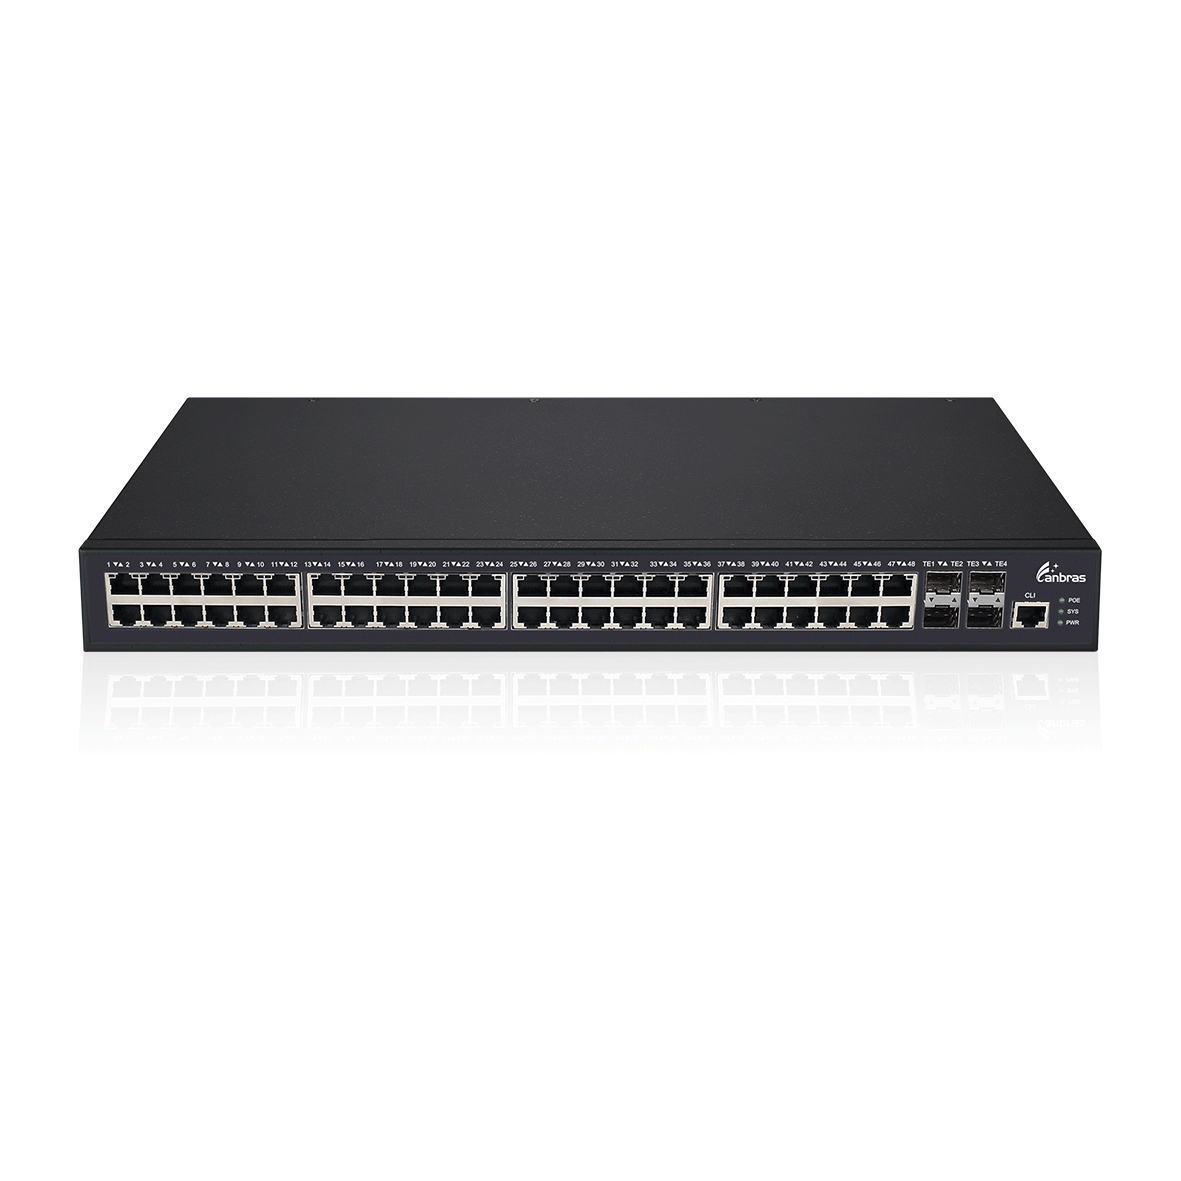 Managed Ethernet Switch with 48 GE PoE ports, 4×10GE/GE SFP+ ports